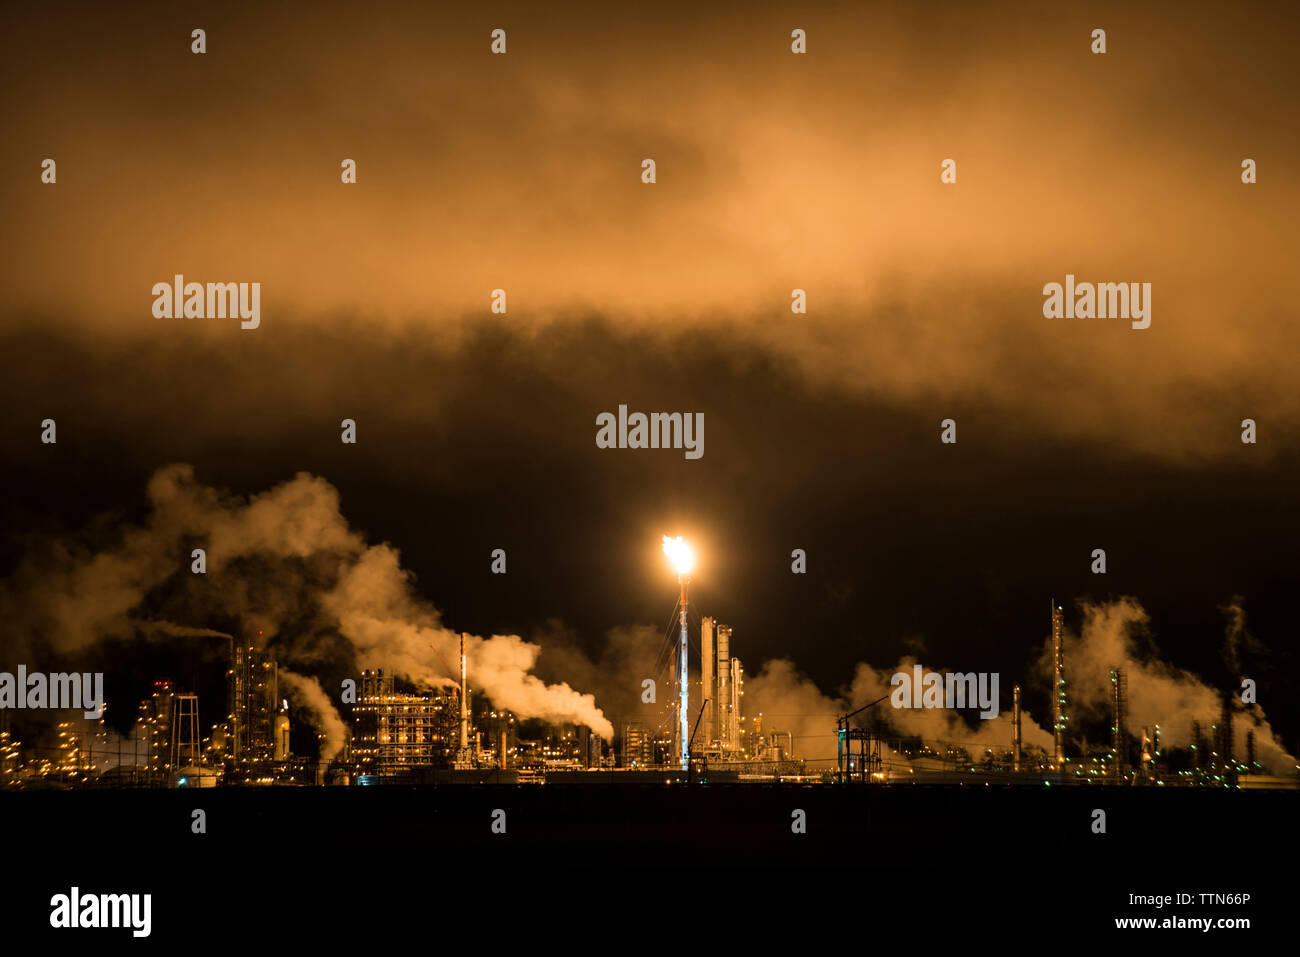 Smoke emitting from factory in sky at night Stock Photo